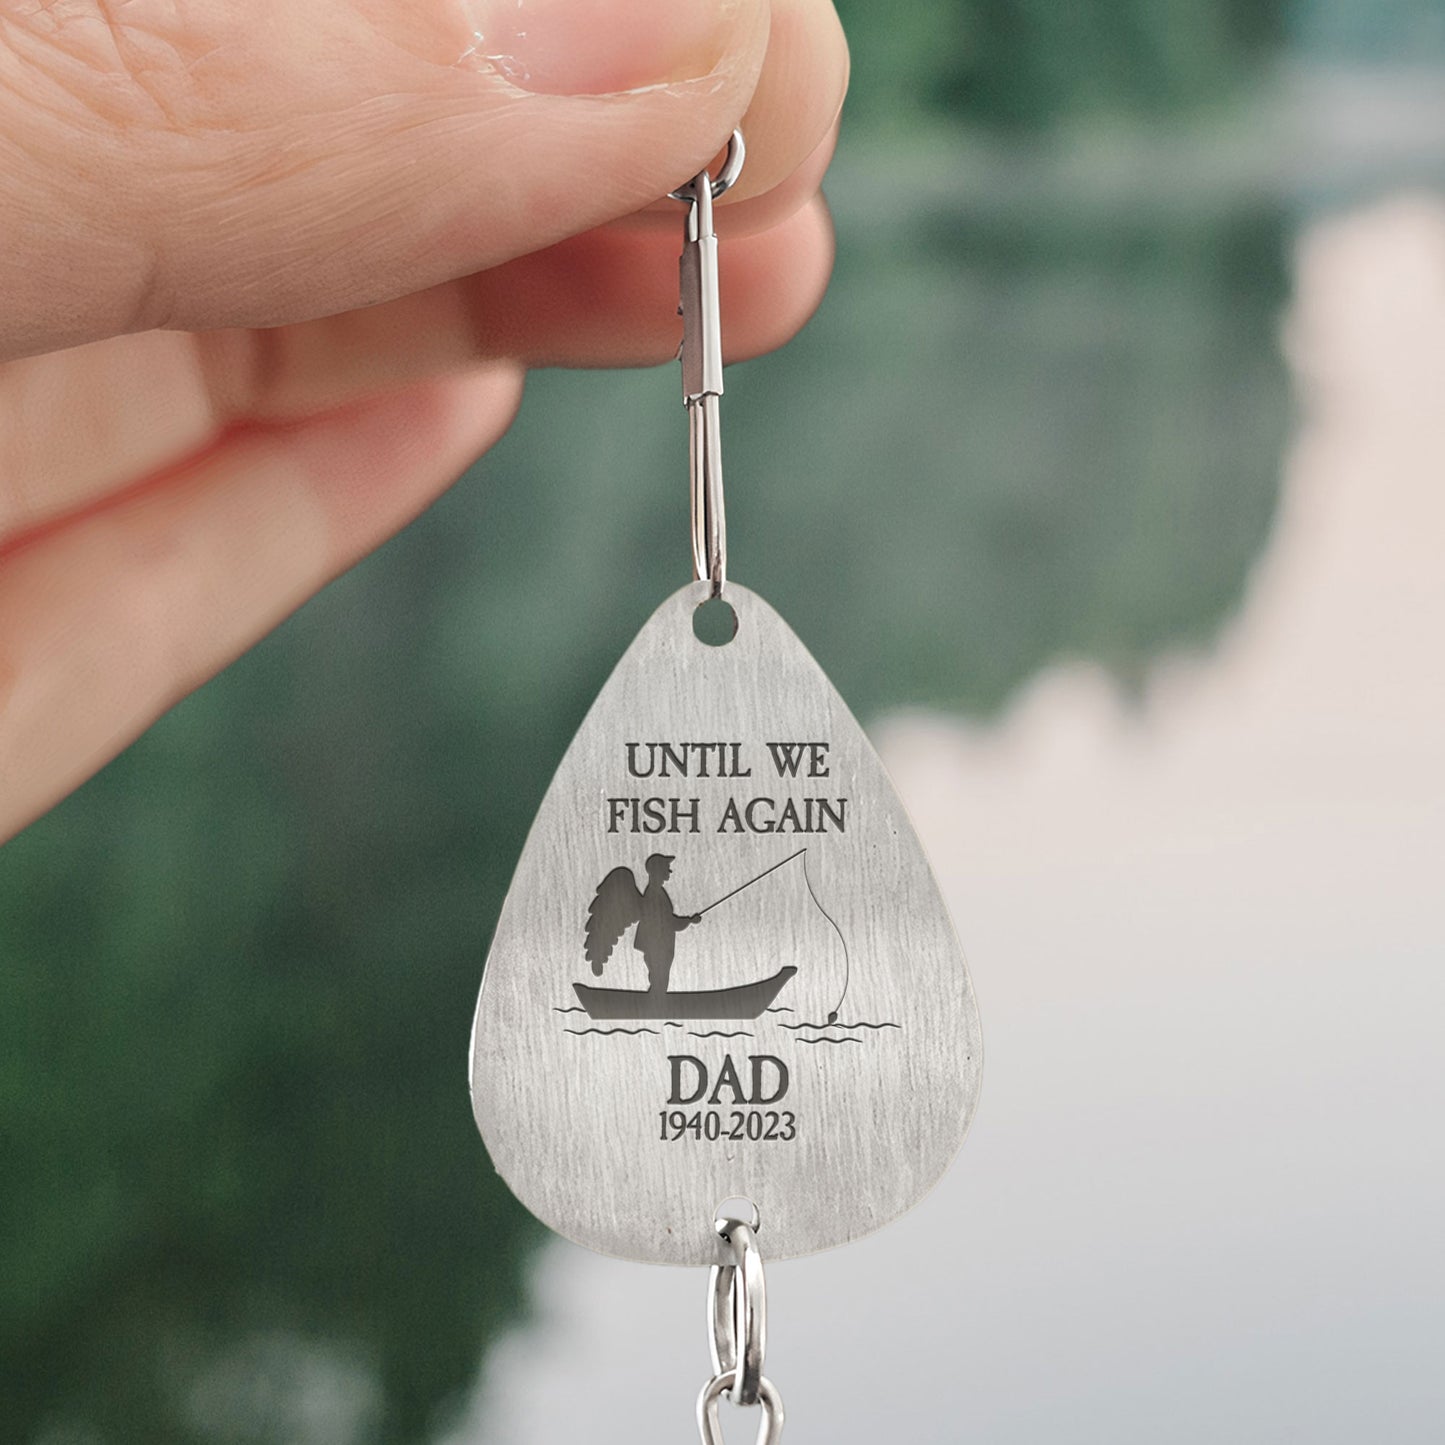 Until We Fish Again - Personalized Fishing Lure Keychain